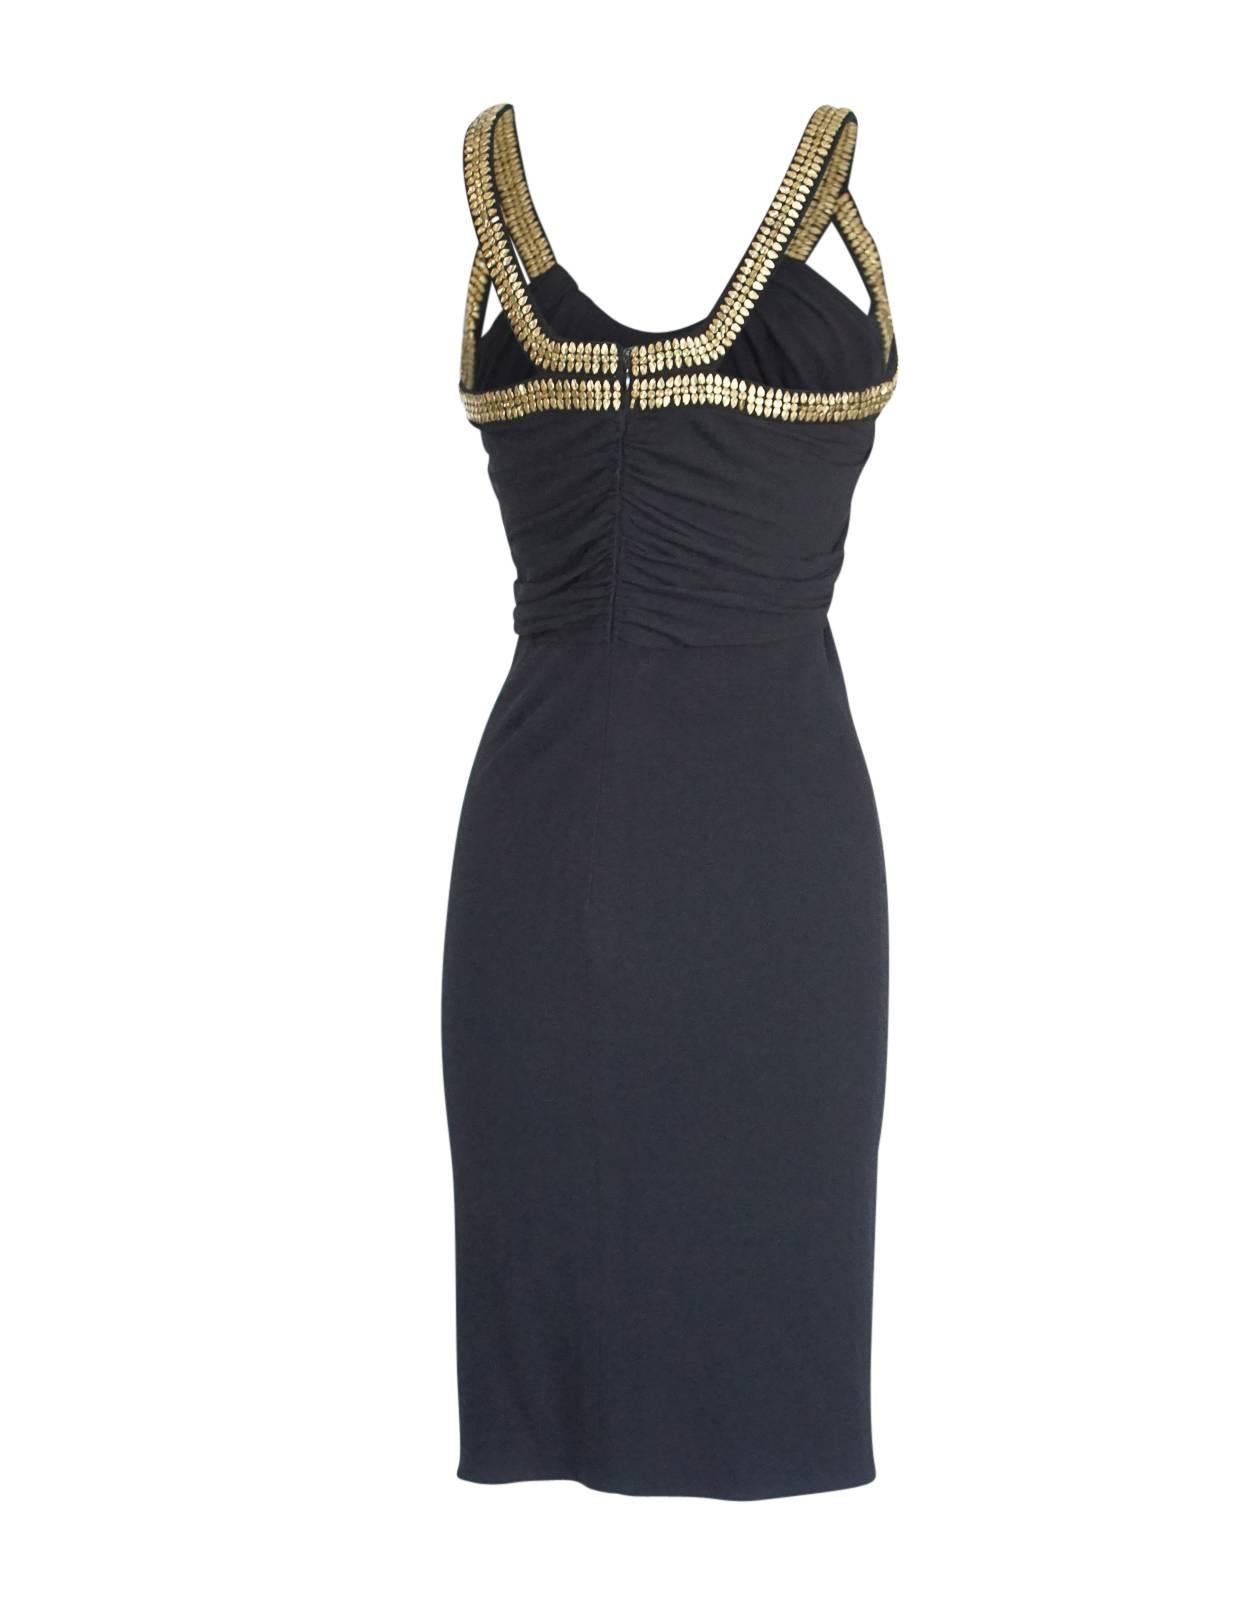 Versace Dress Gold Hardware Black pleated and Rouched  40 / 4 6